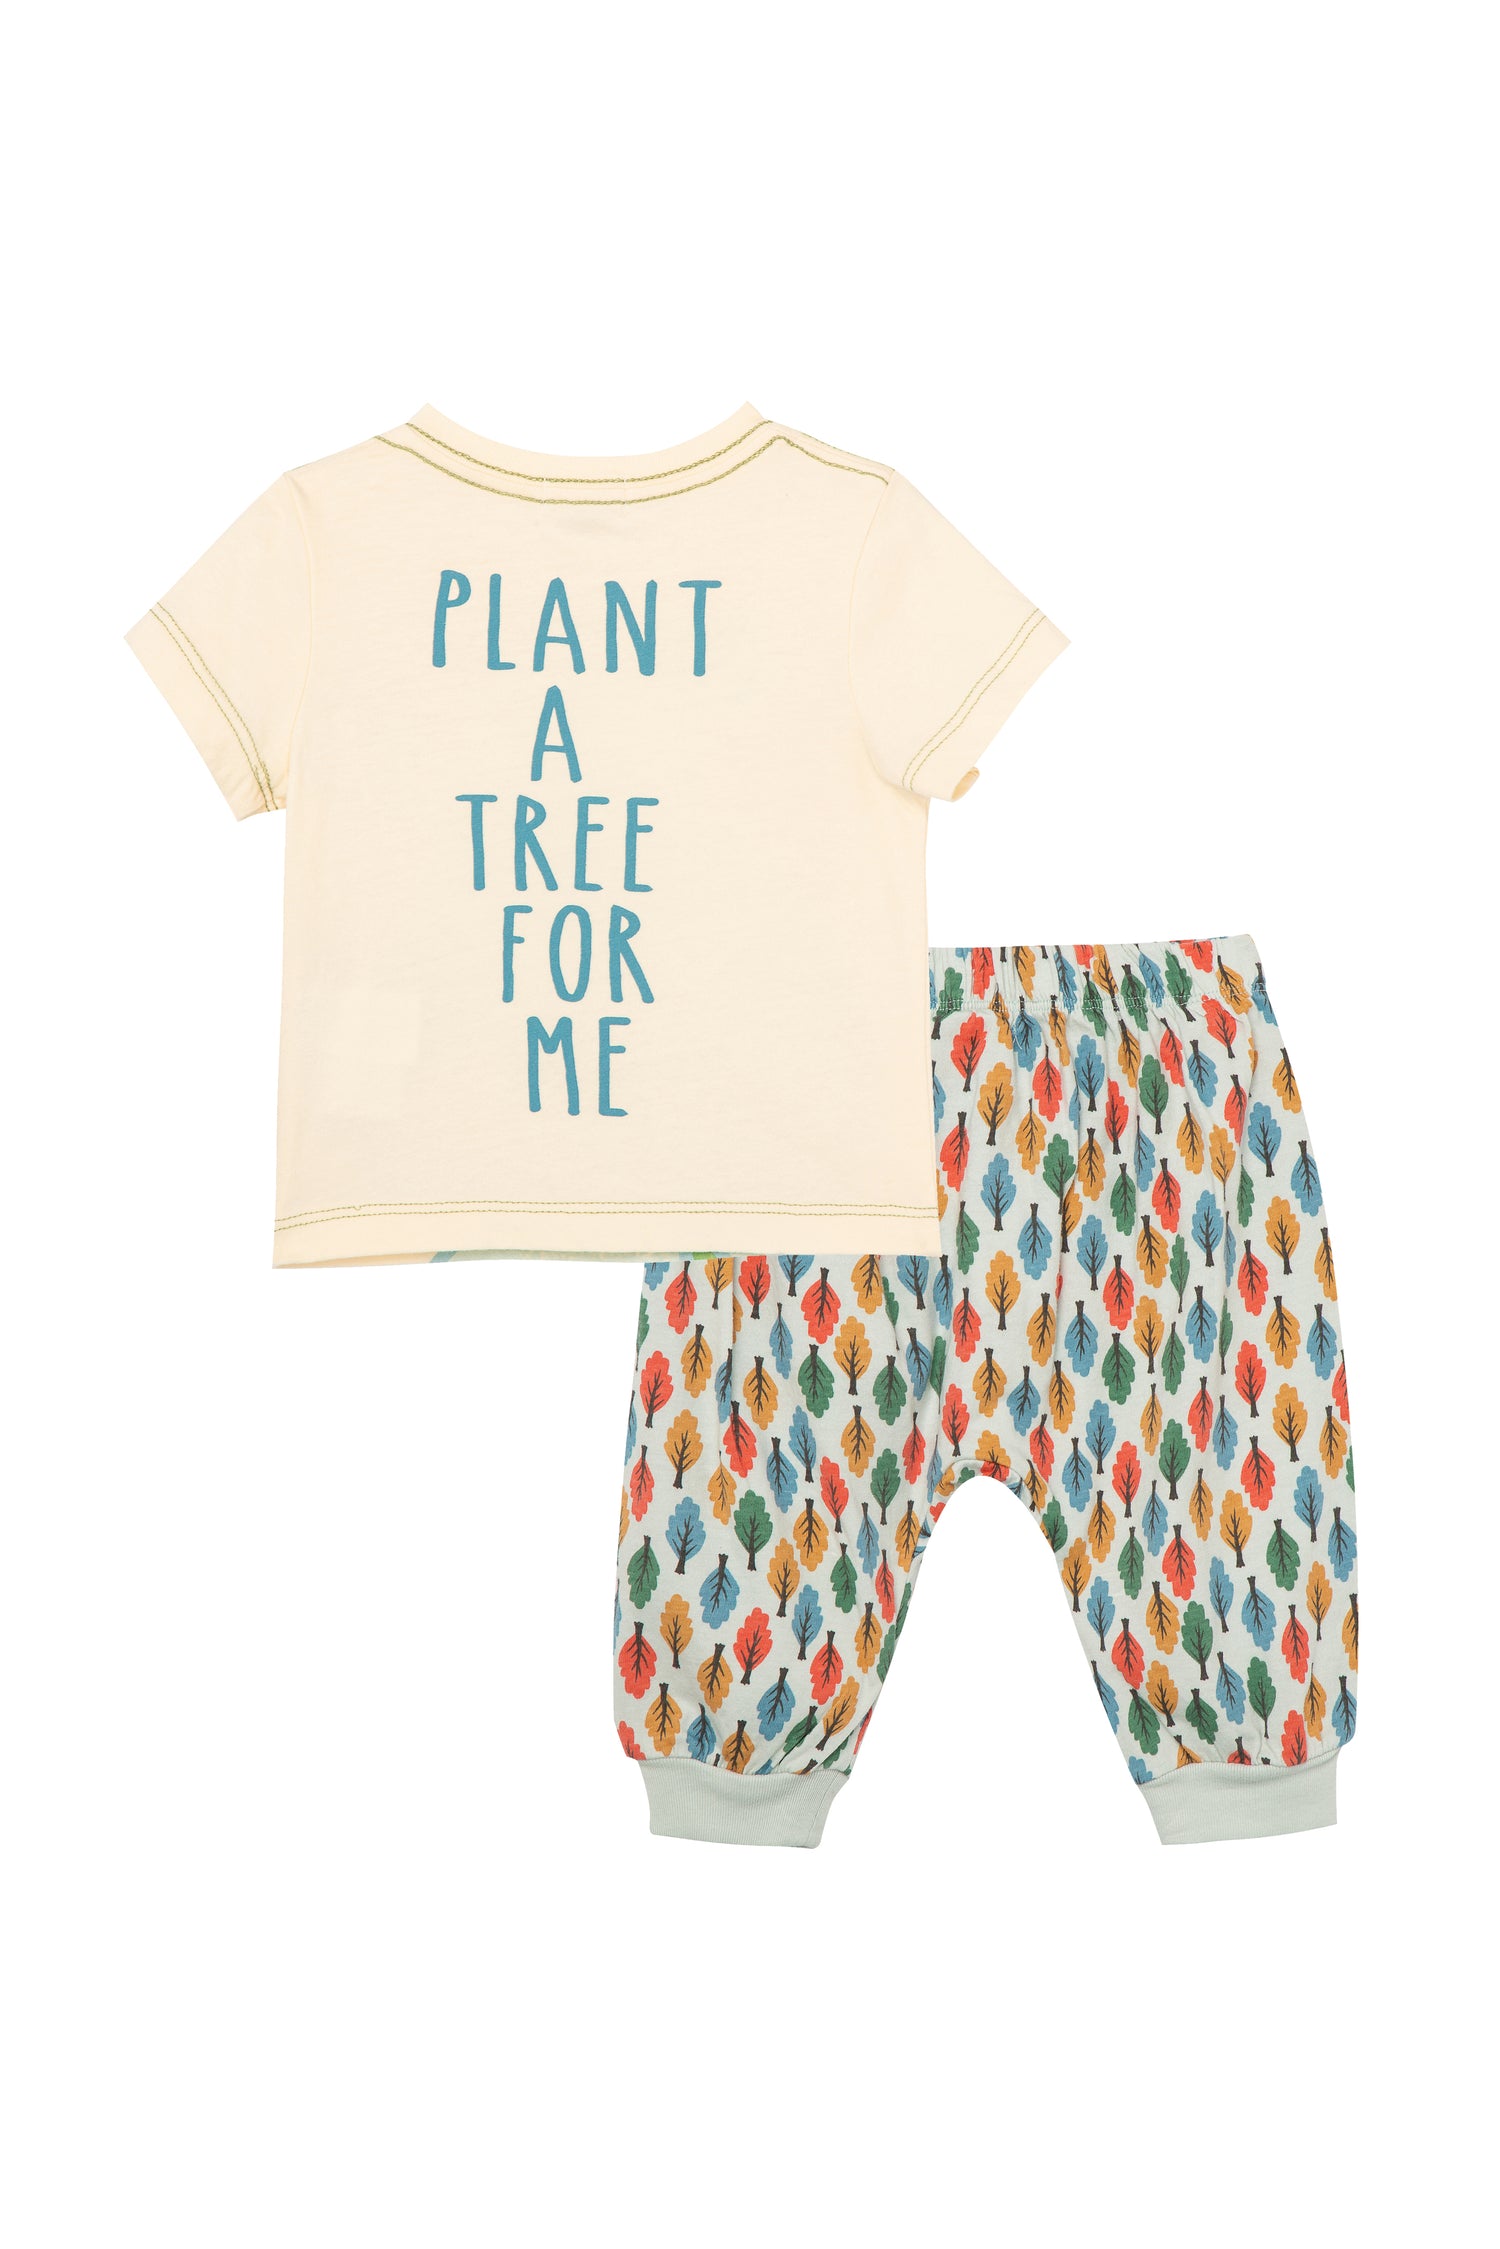 Back of off-white t-shirt with 'plant a tree for me' text and gray sweatpants wiht multi-colored trees